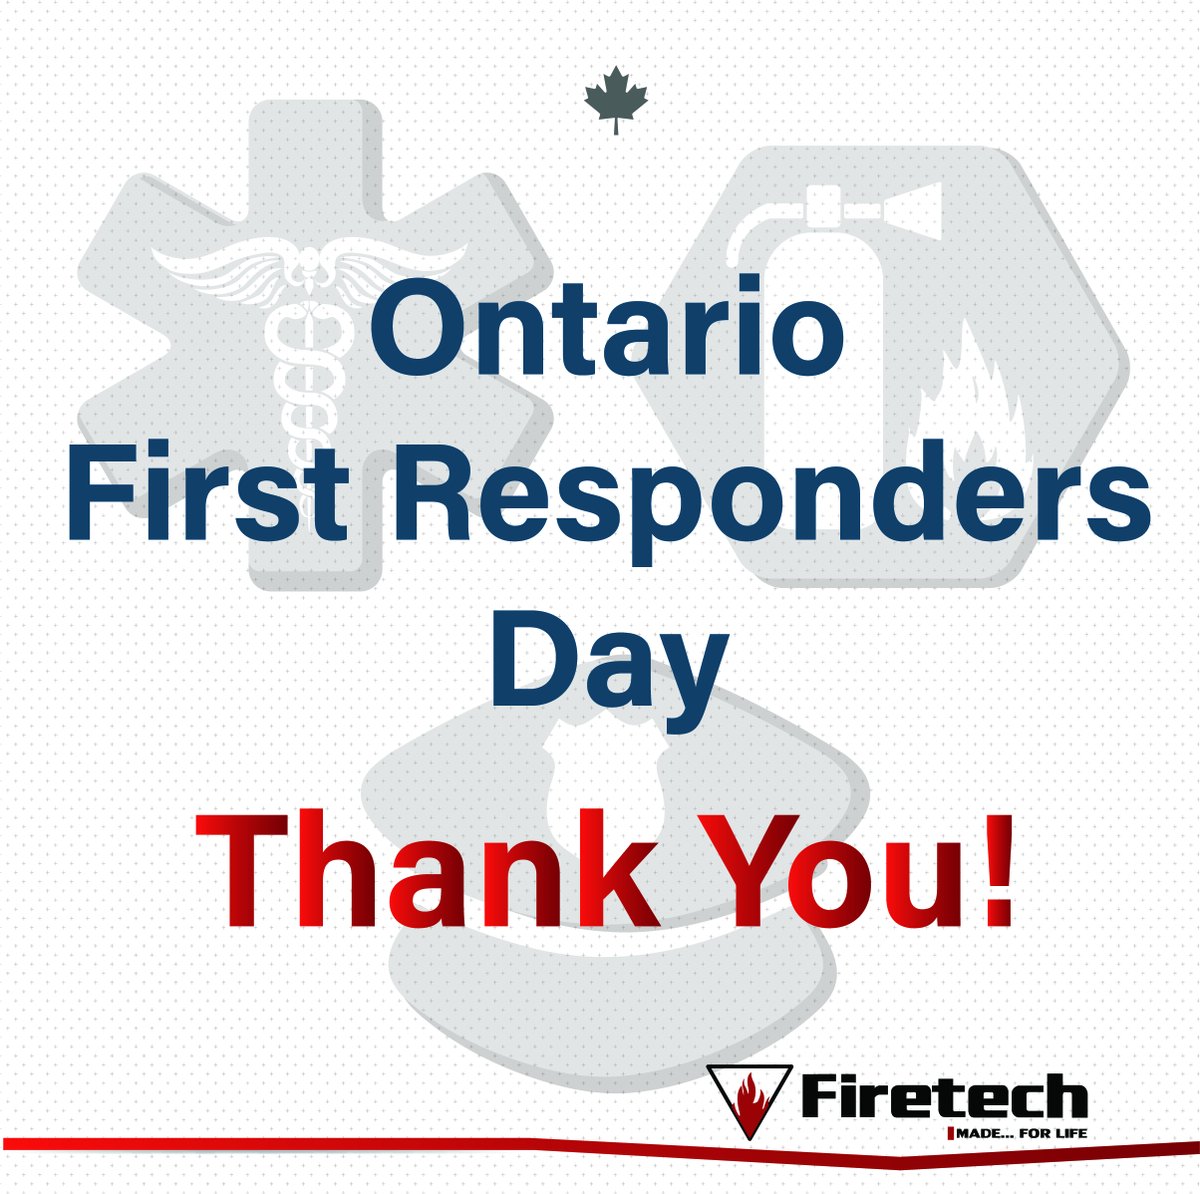 We thank our health heroes!! #firetechmfg #ems #ppe #firstresponders #ontariofirstrespondersday #custommanufacturing #manufacturing #manufacturer #canadianmanufacturer #MadeInCanada #canadianmade #medicalsupplies #paramedics #paramedicine #ambulance #firefighters #police